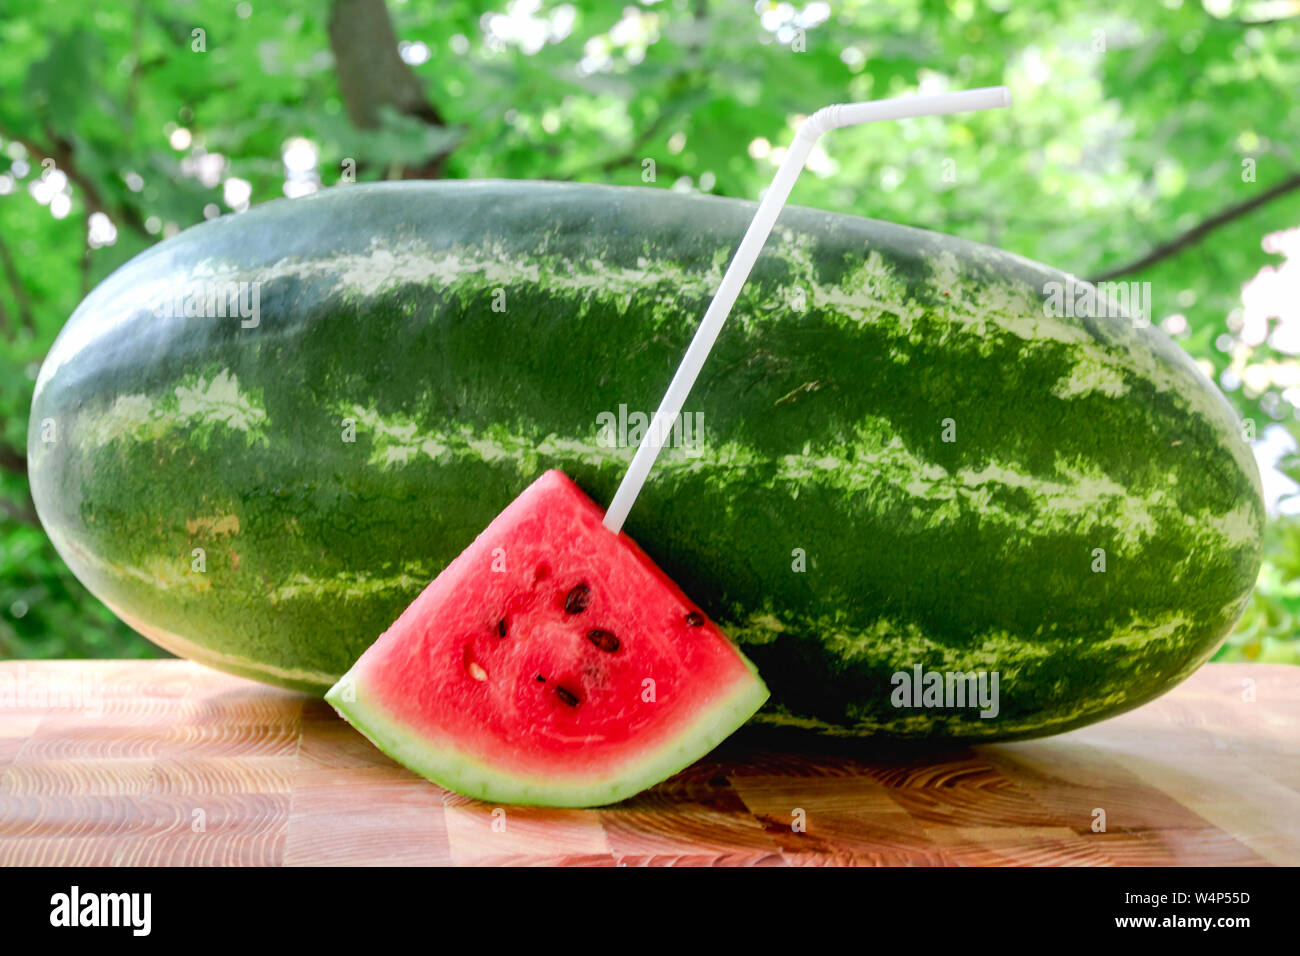 A triangular piece of a ripe watermelon with a straw stands in front of a  long striped watermelon. Drink a watermelon through a straw Stock Photo -  Alamy